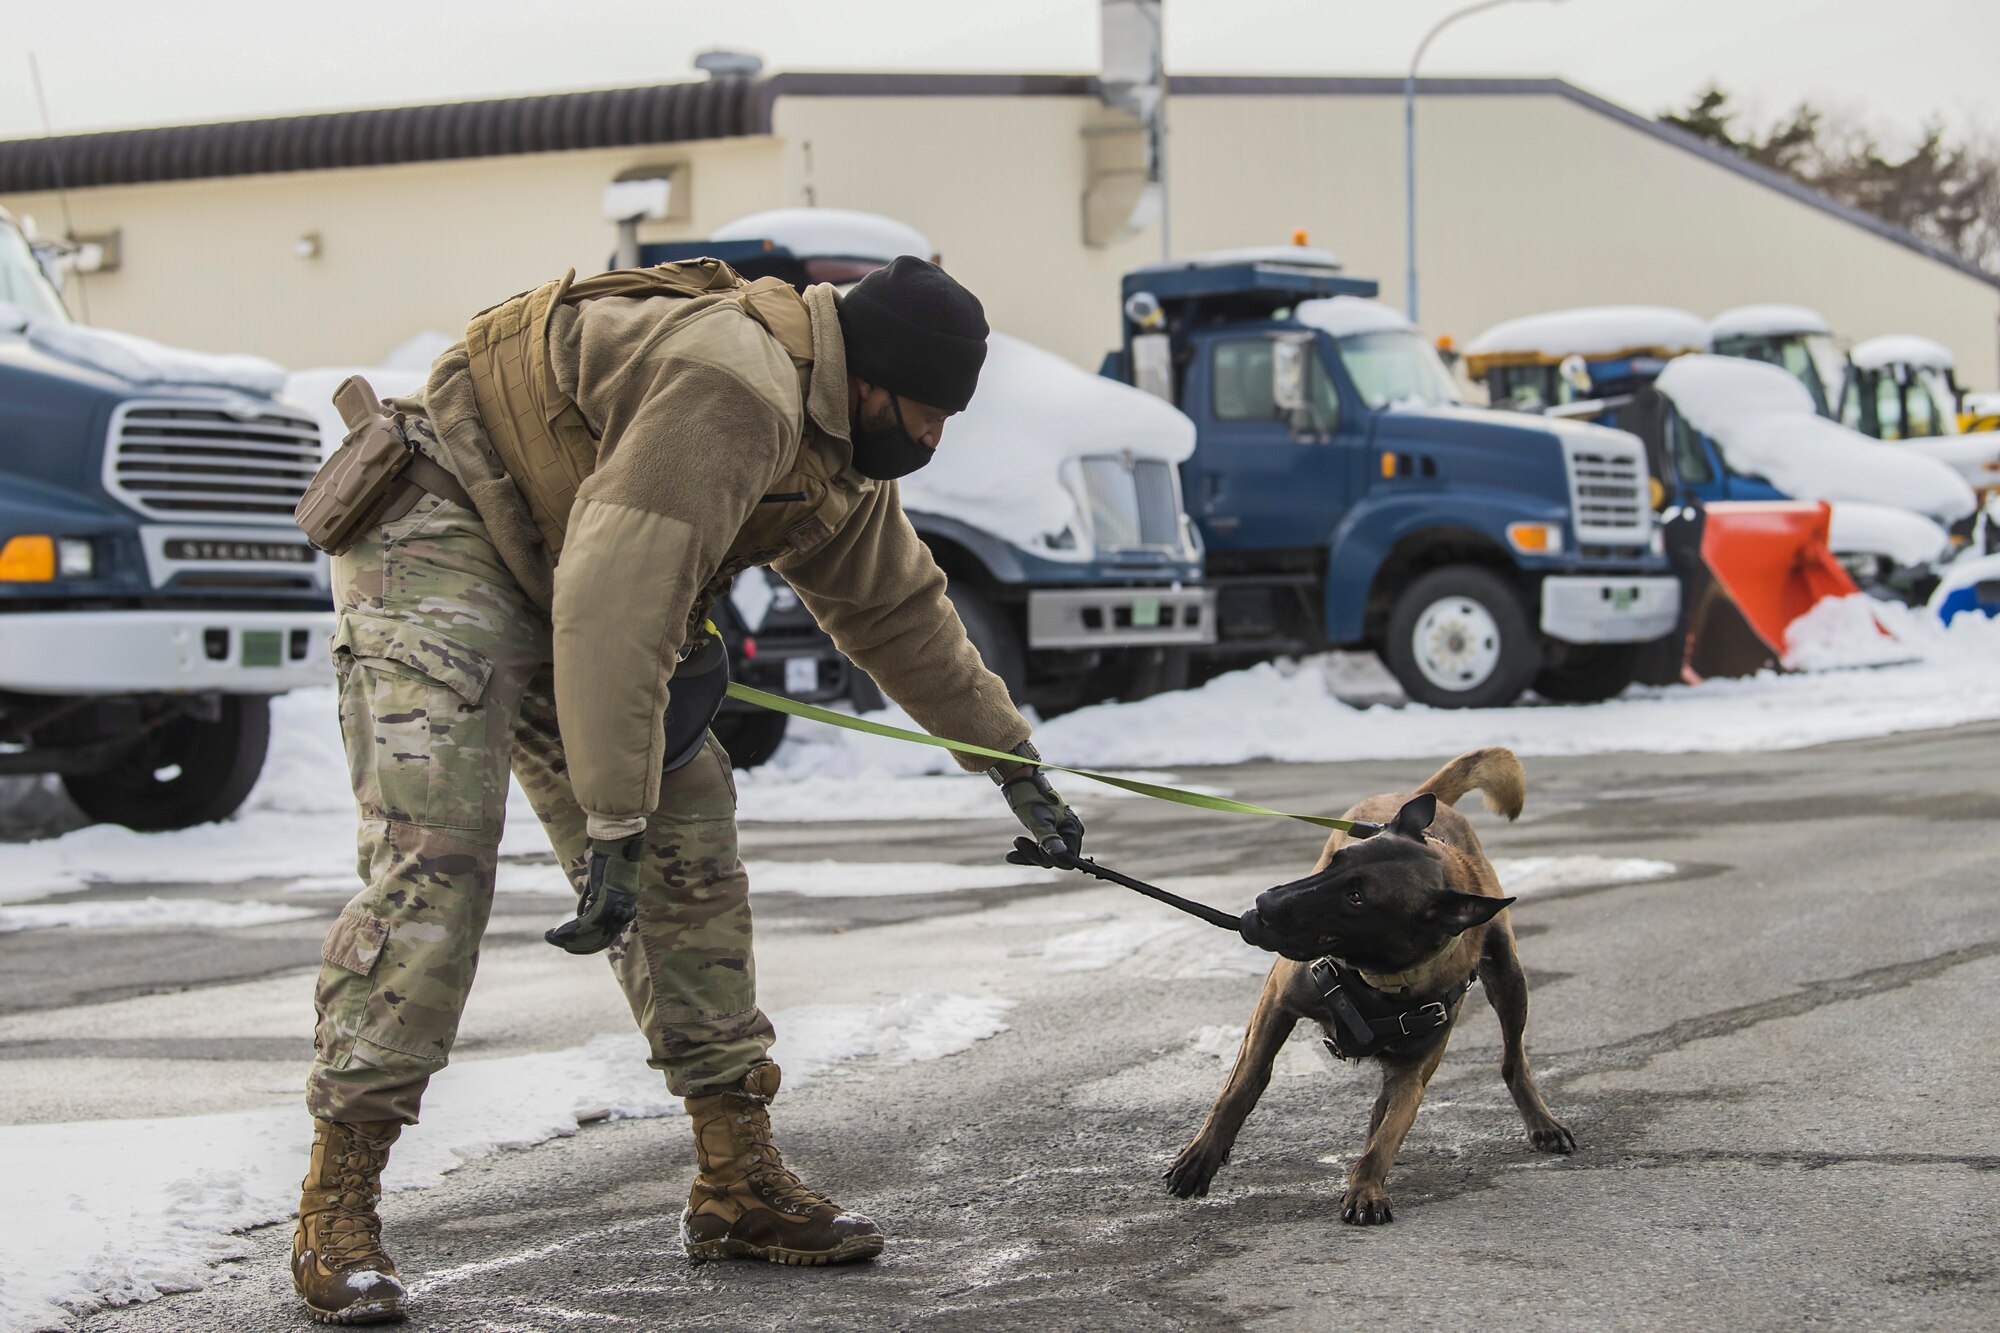 Man in uniform plays tug-of-war with his dog in a snowy parking lot